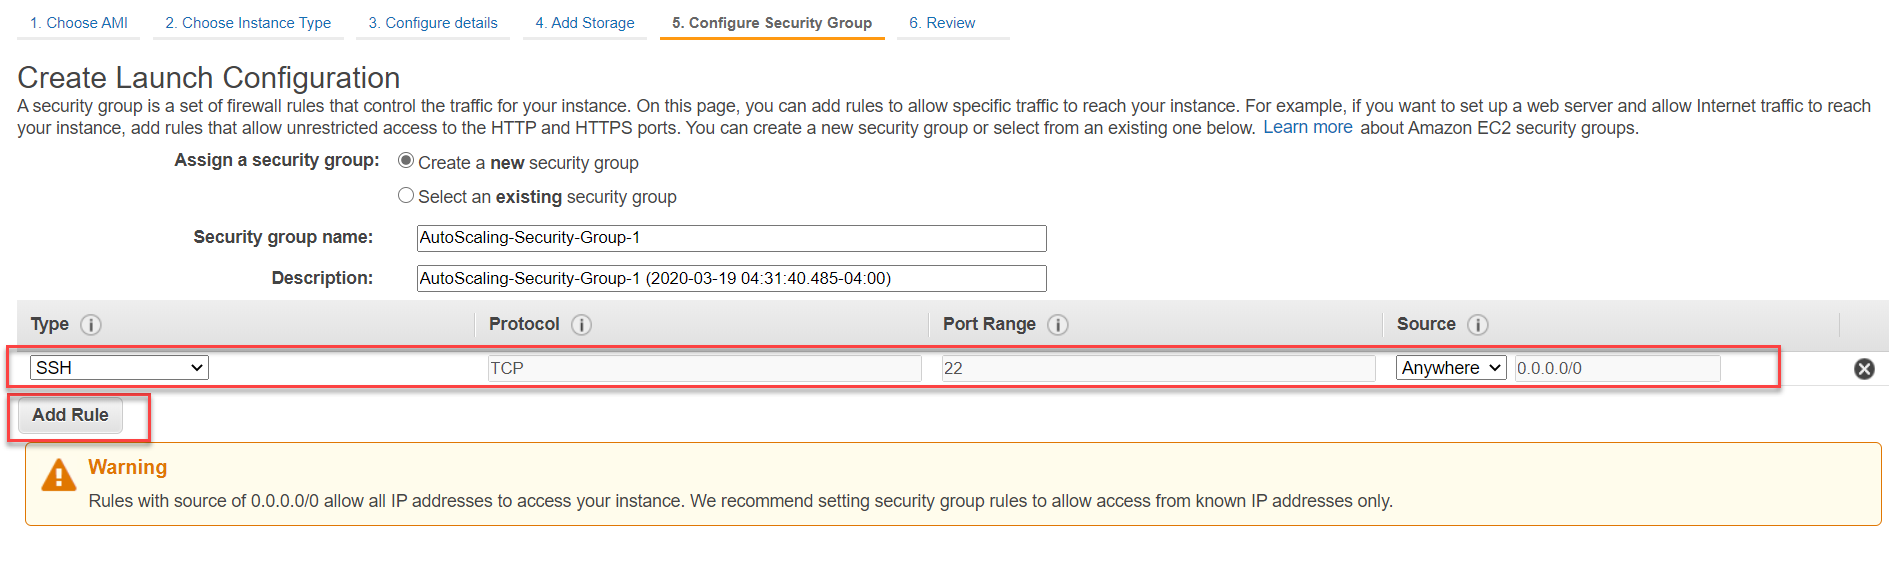 Security Group configurations